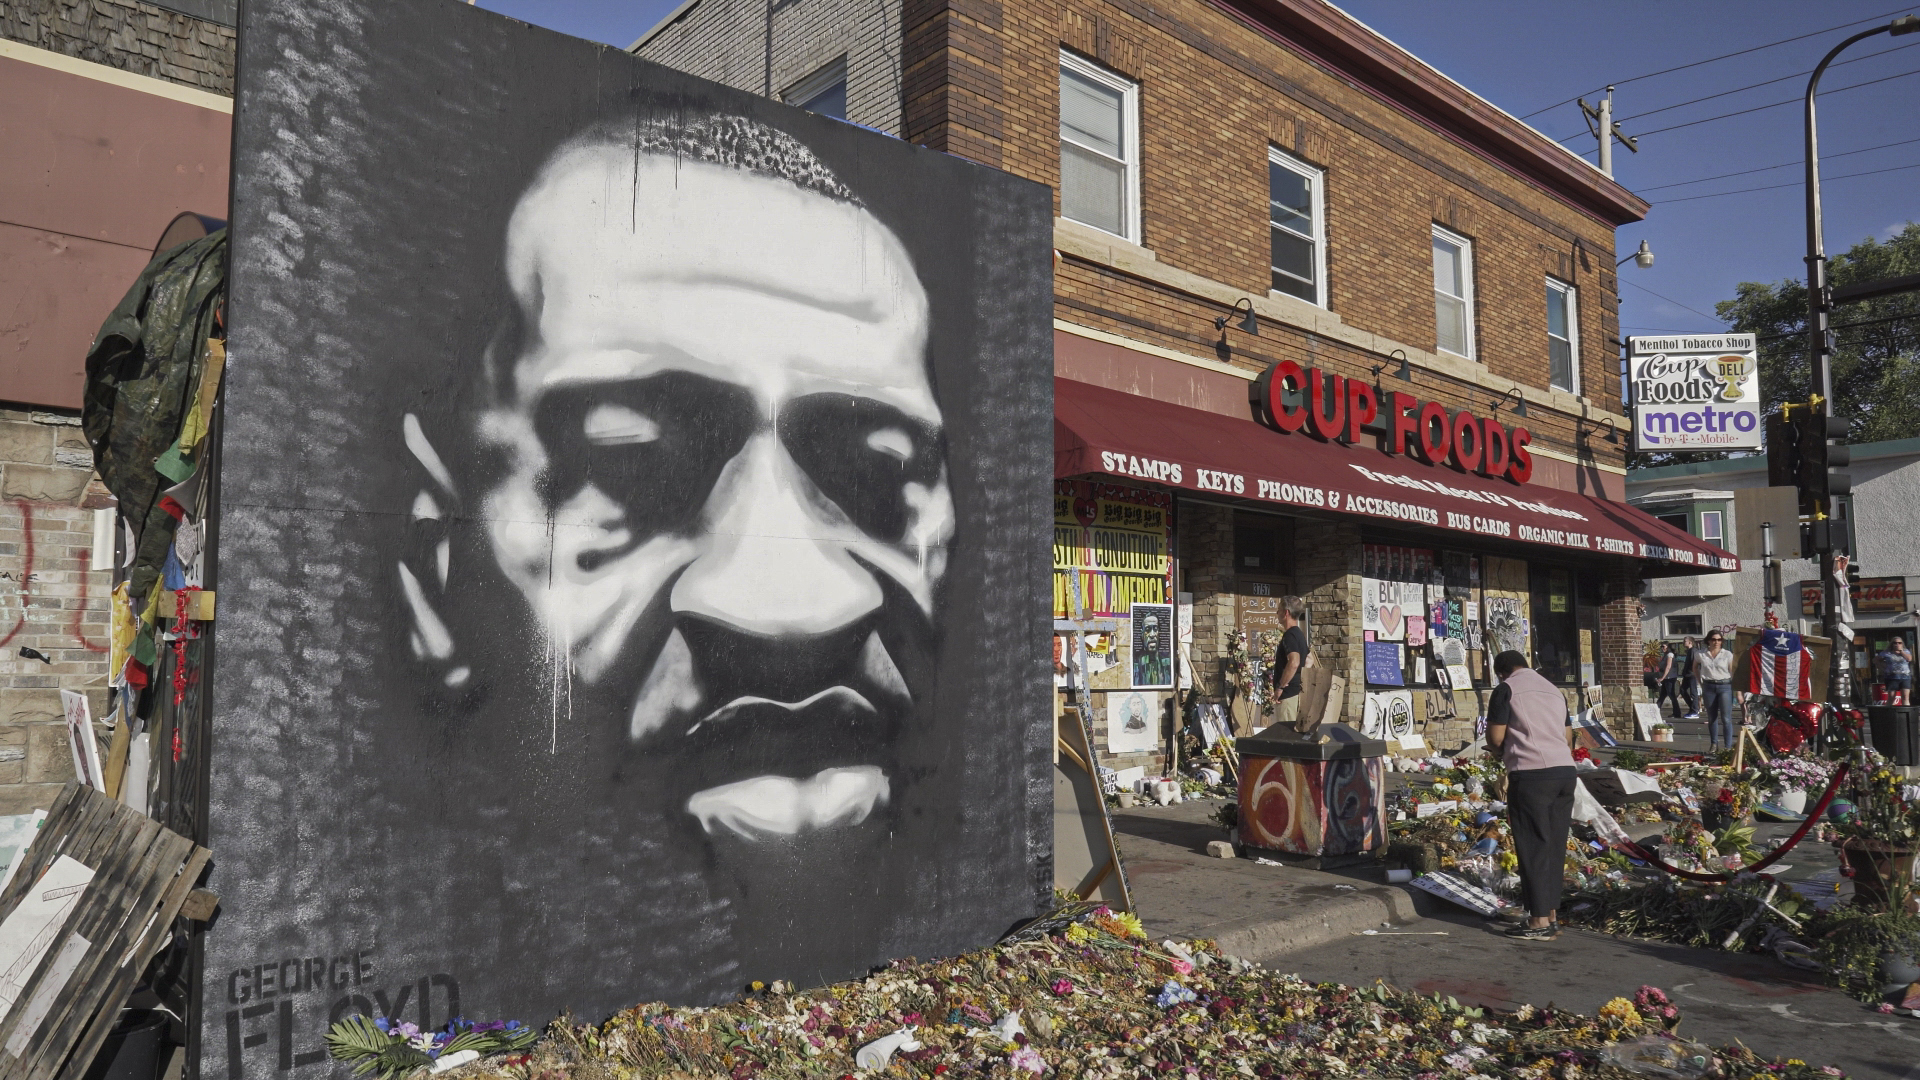 Mural of George Floyd's face next to street protest